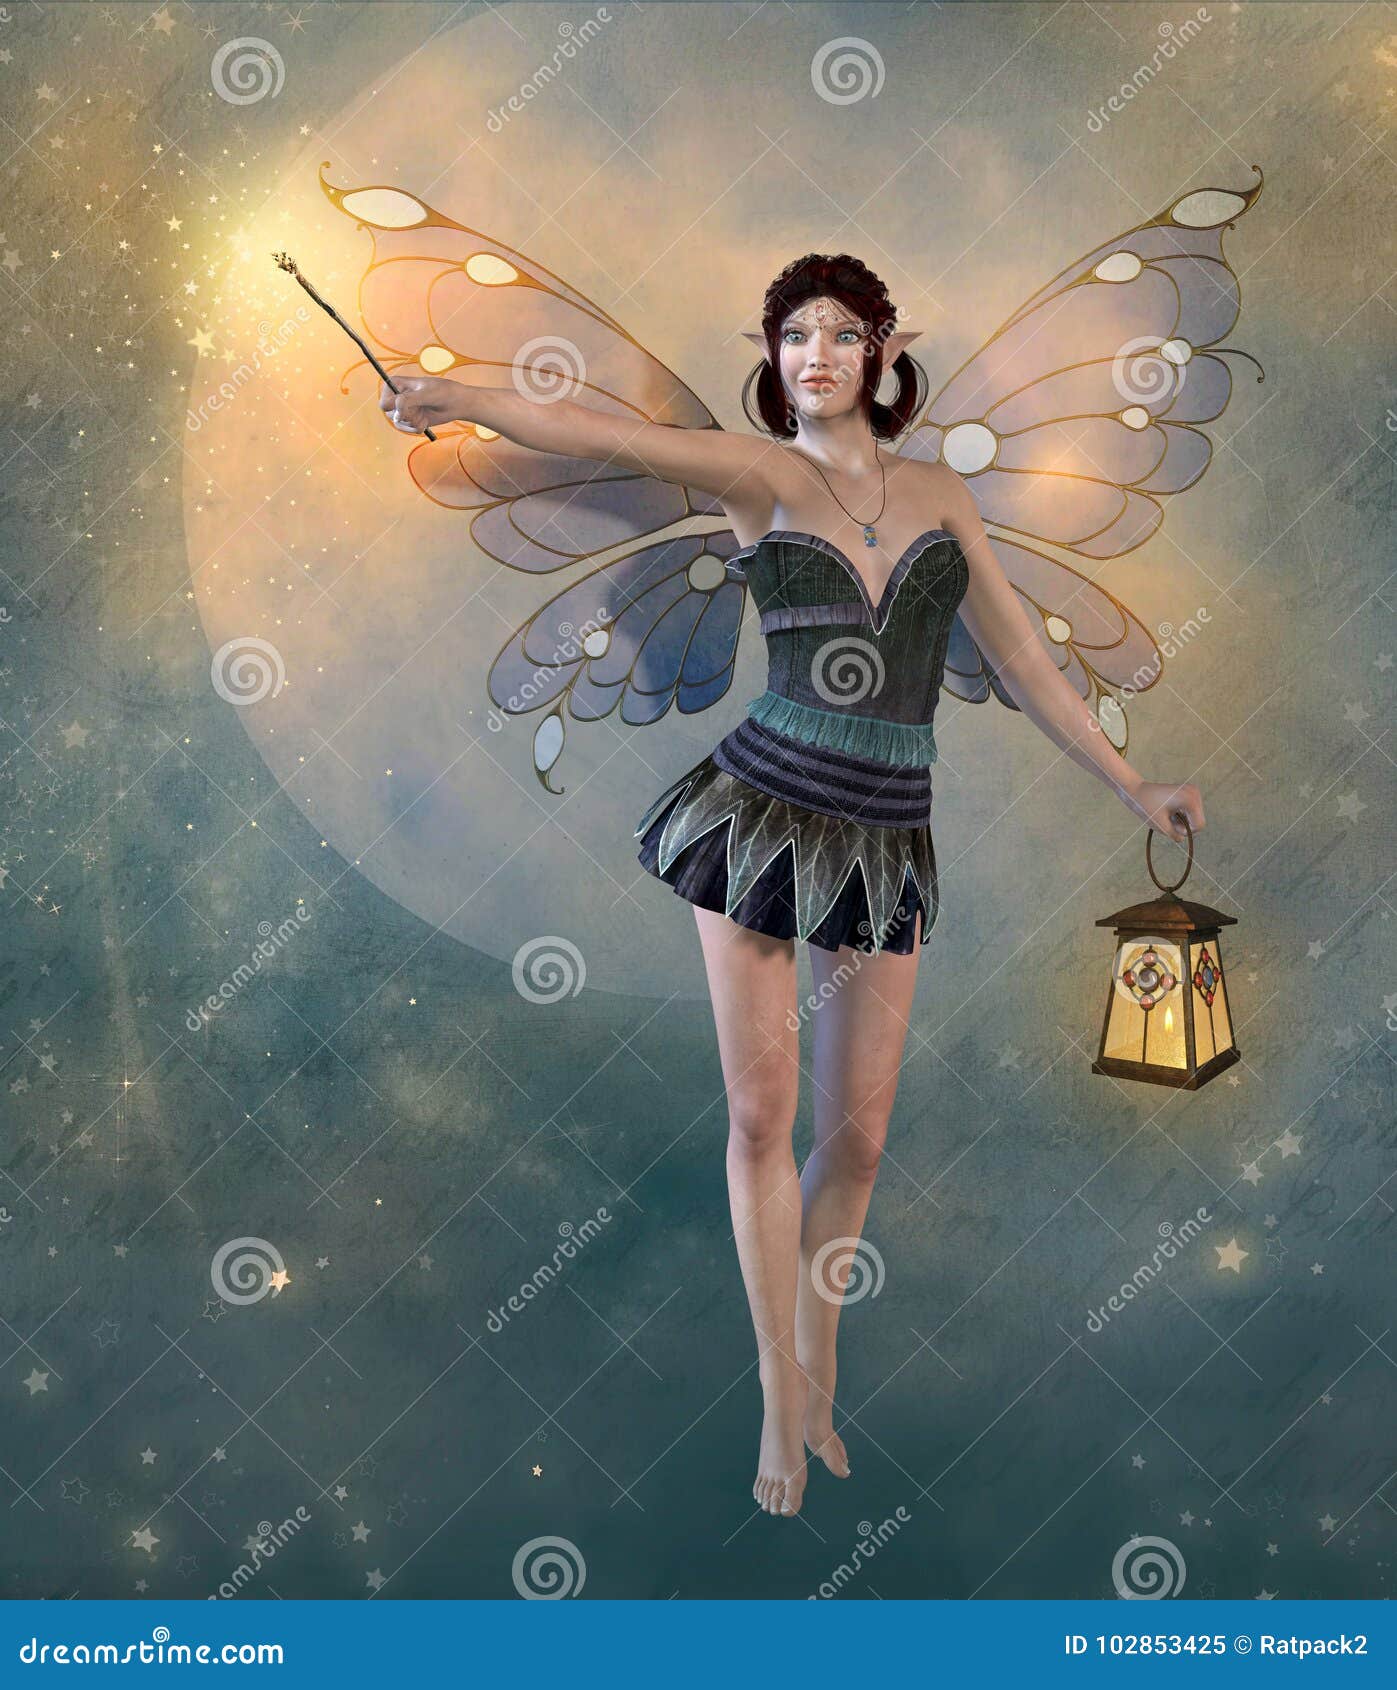 enchanting fairy with a magic wand